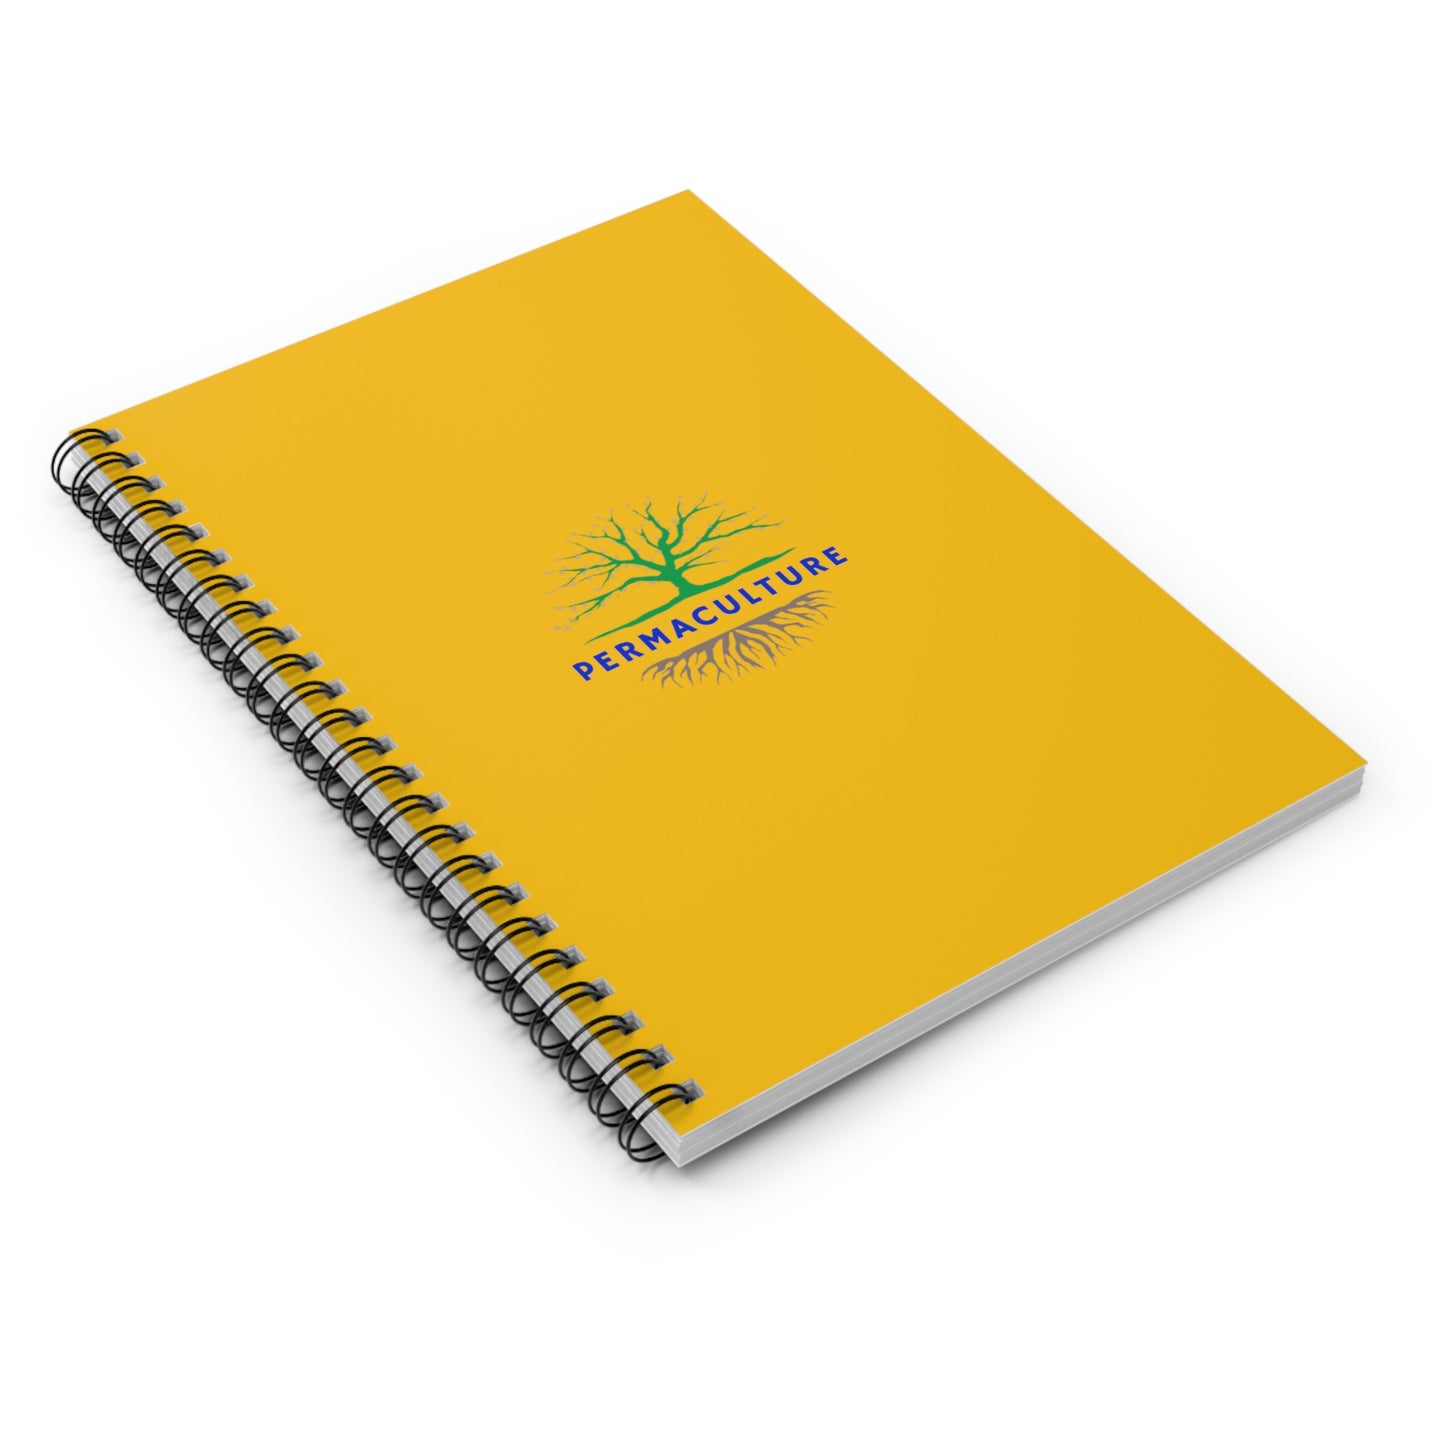 Permaculture - Spiral Notebook - Ruled Line - Yellow Cover